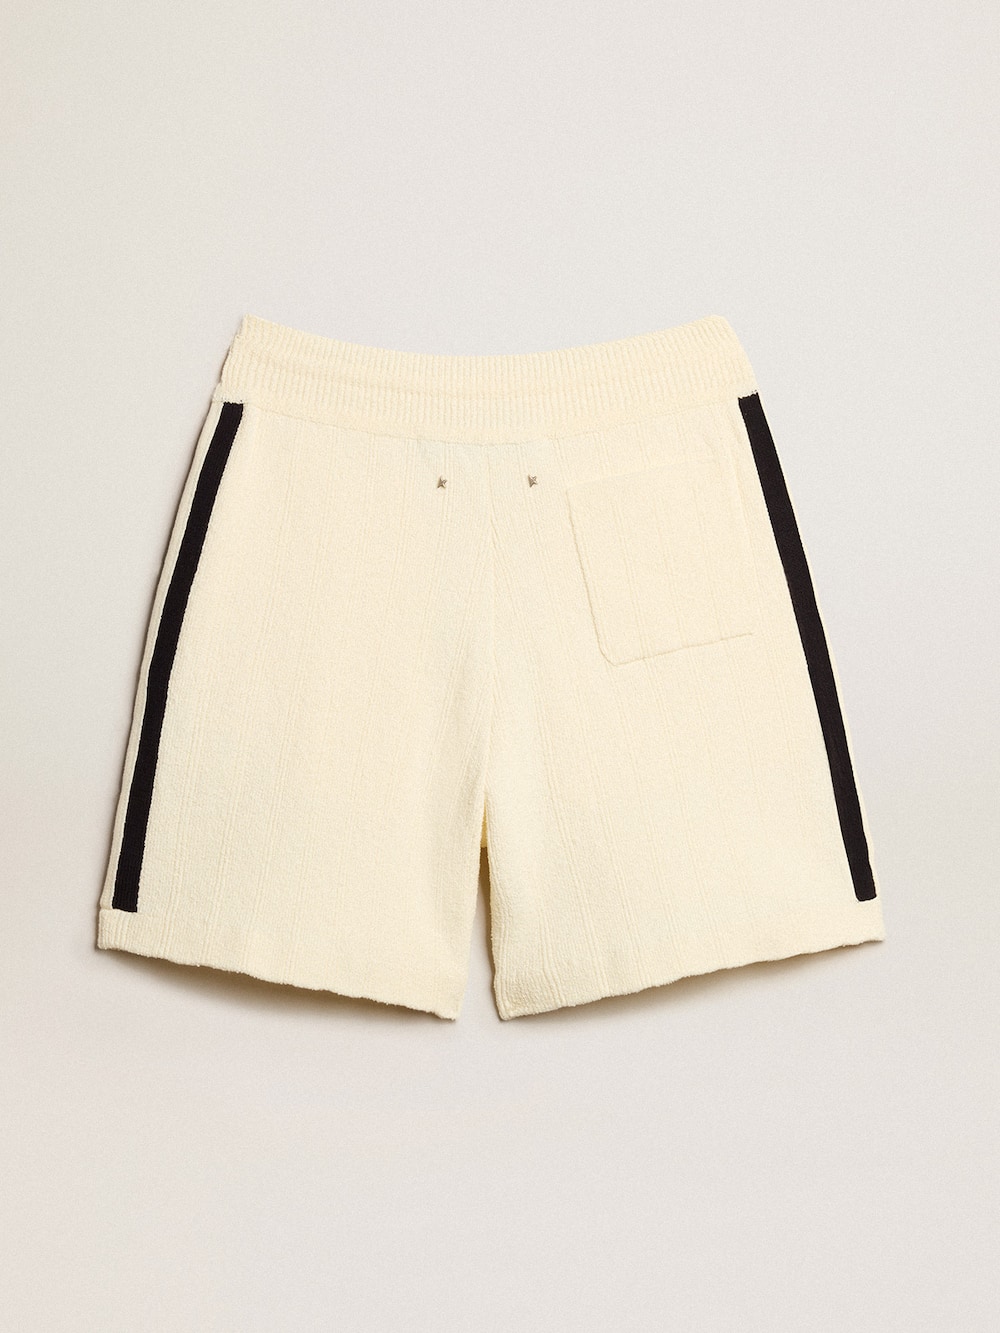 Golden Goose - Women's vintage white shorts with blue rib knit on the sides in 